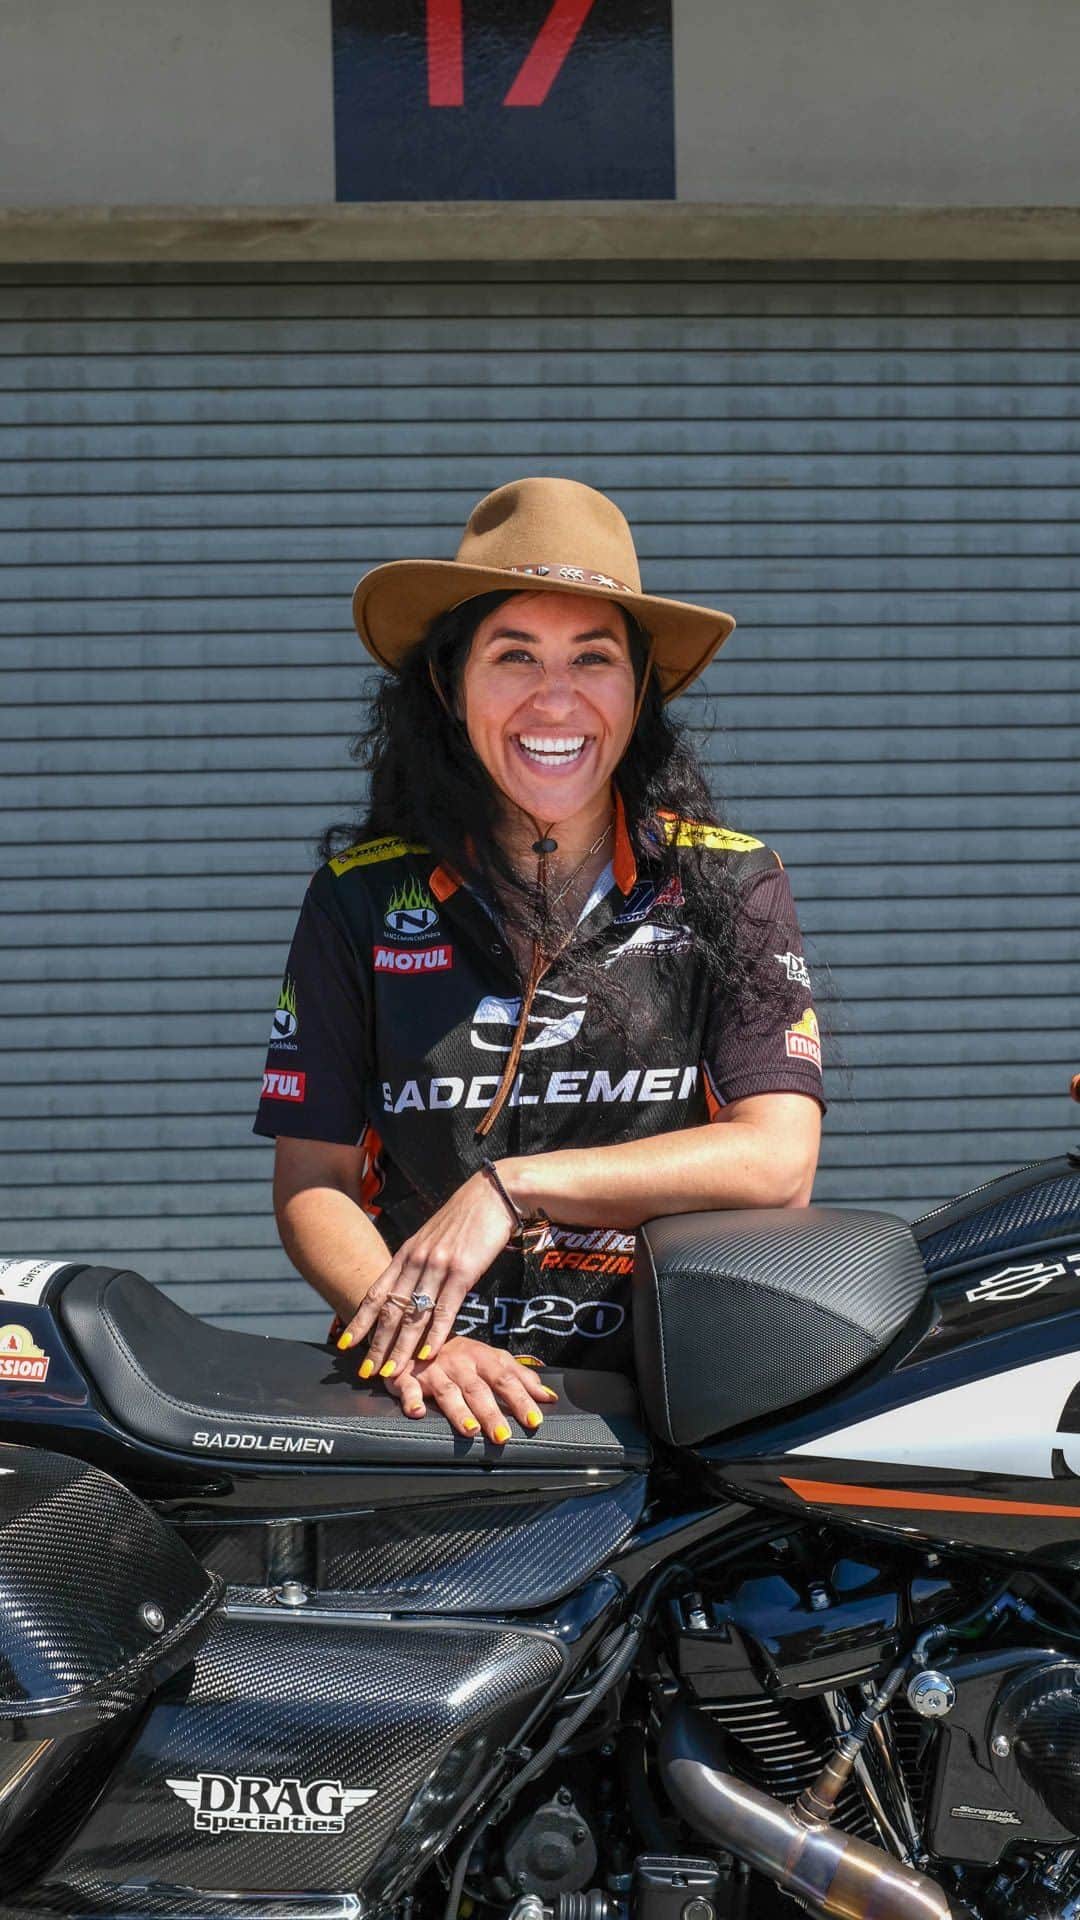 Harley-Davidsonのインスタグラム：「This episode of My Garage brings us to Laguna Seca Raceway in Monterey, CA where we rendezvous with @lady_racer926. Patricia is a professional motorcycle racer who competes in both the Mission King of the Baggers and Super Hooligan classes. But she didn’t end up there by accident - it took years of pouring everything she had into racing. ​  Watch the full video on the @prismsupply_ YouTube channel now.​  @harleydavidson @hdpanamerica #HarleyDavidson #PrismSupply #MyGarage #HarleyPartner #PanAmerica #MotoAmerica #Kingofthebaggers​」